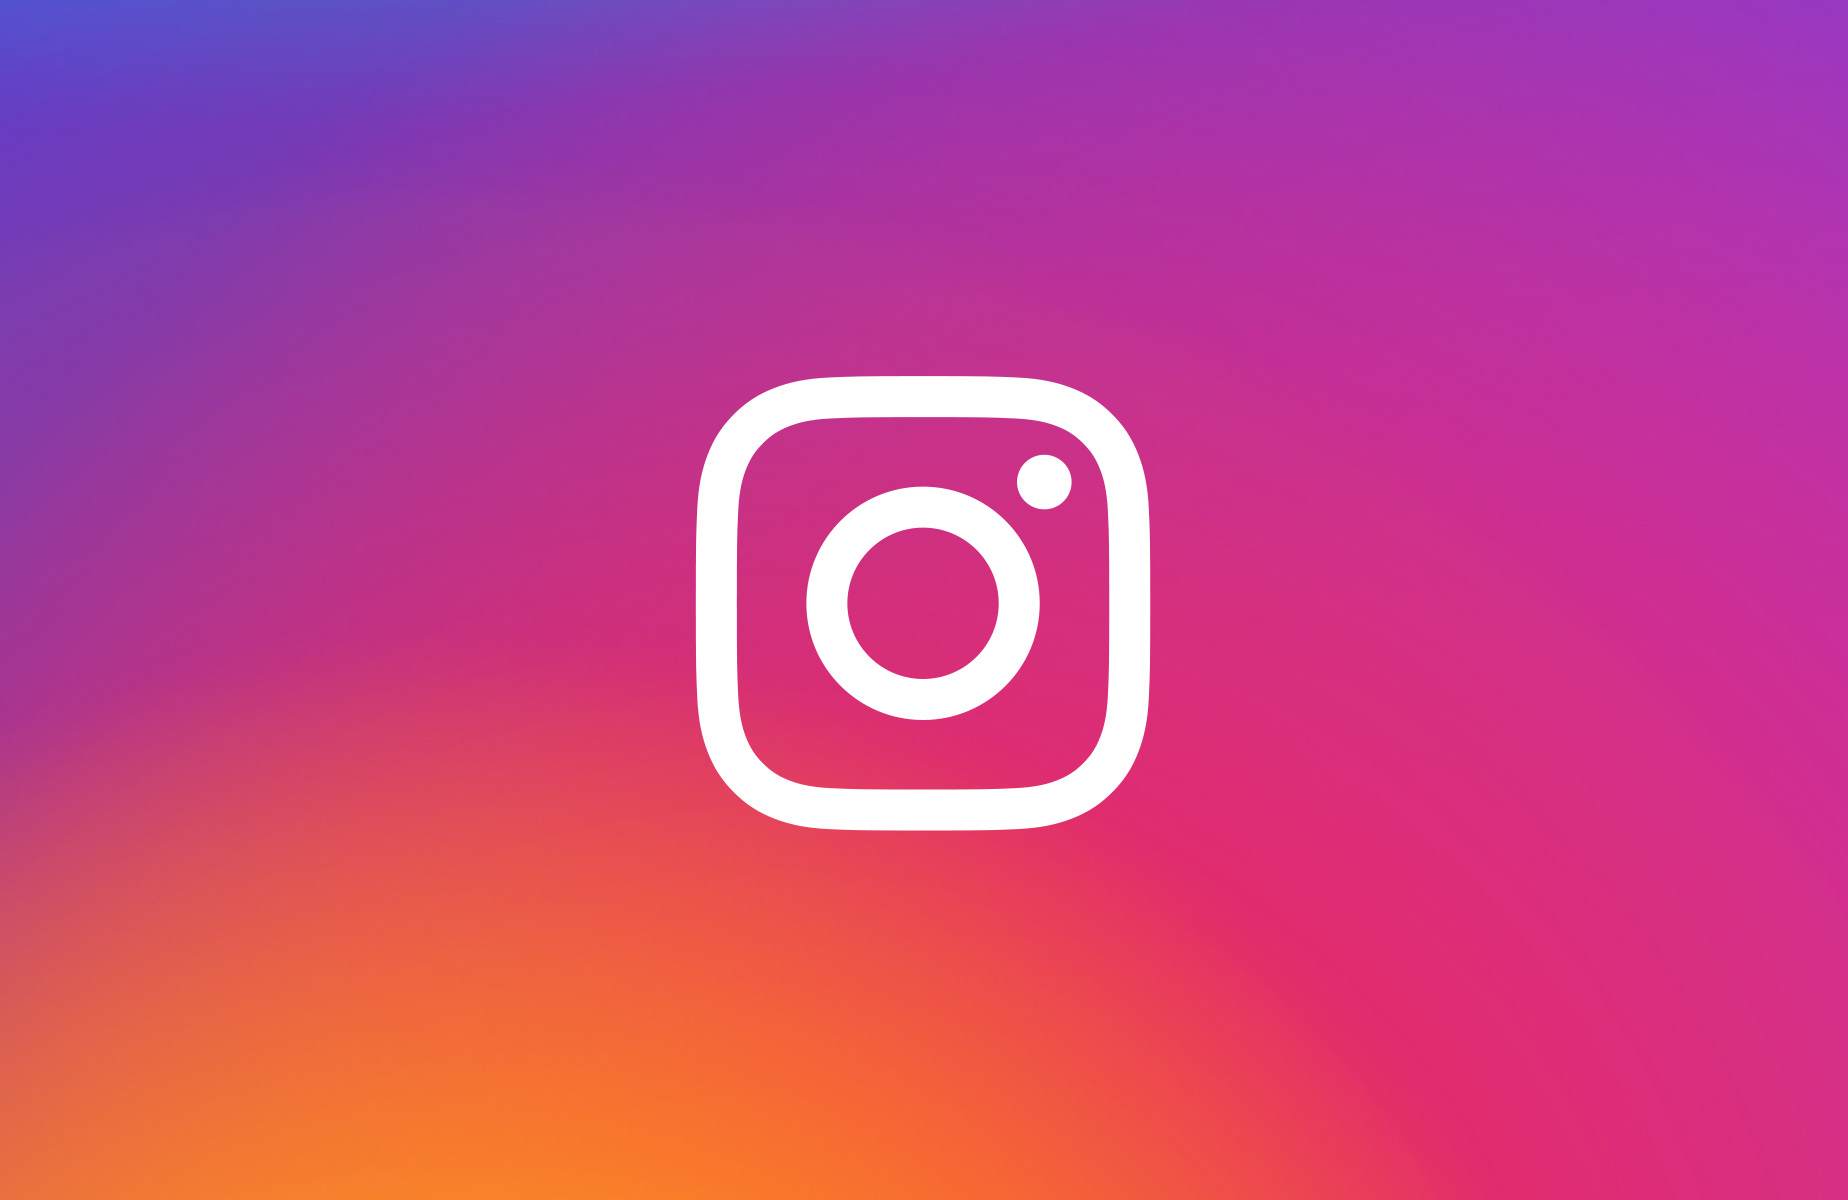 Instagram may charge a fee for adding Links to photos